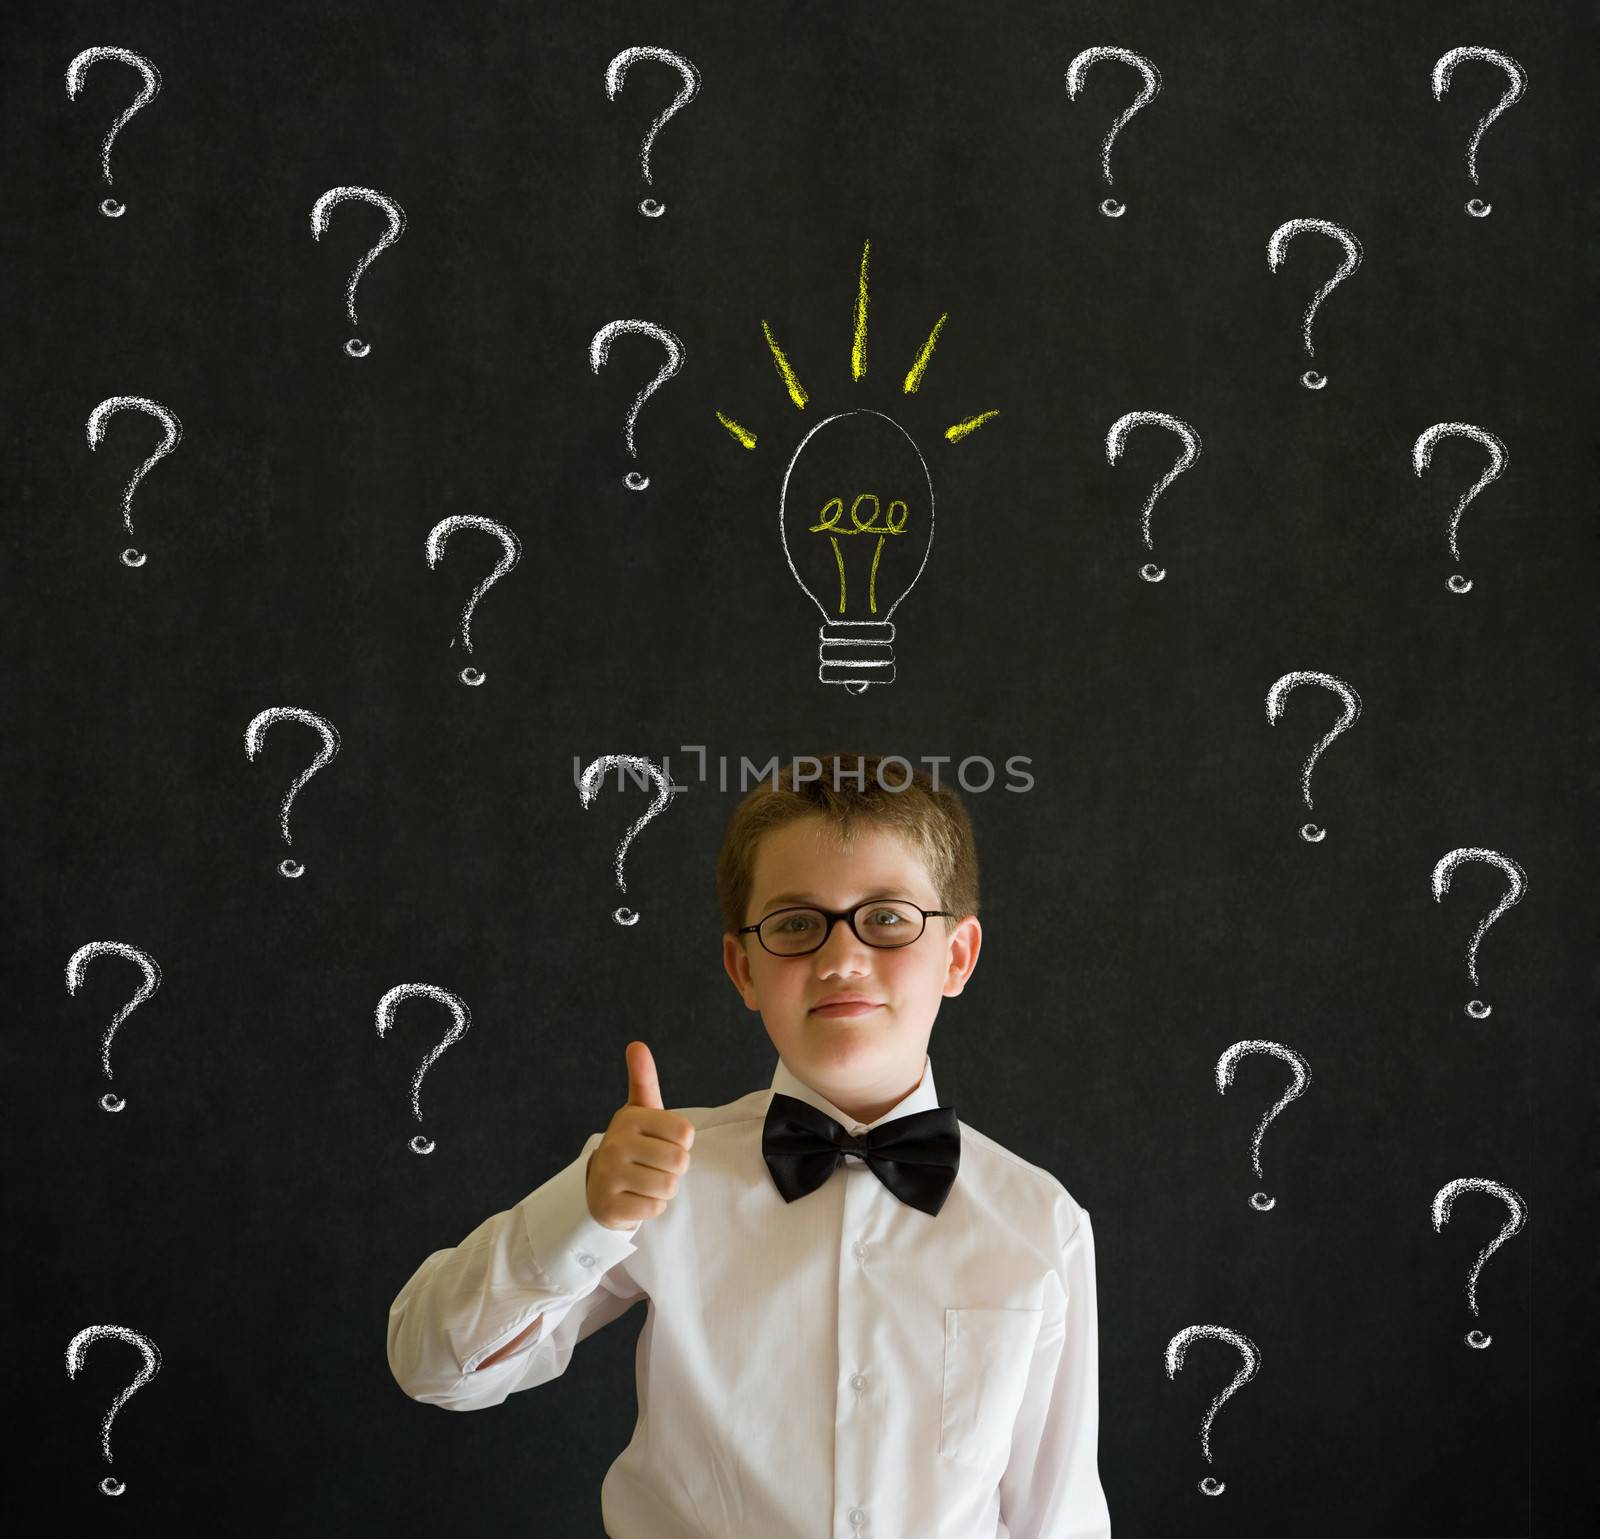 Thumbs up boy dressed up as business man questioning ideas on blackboard background